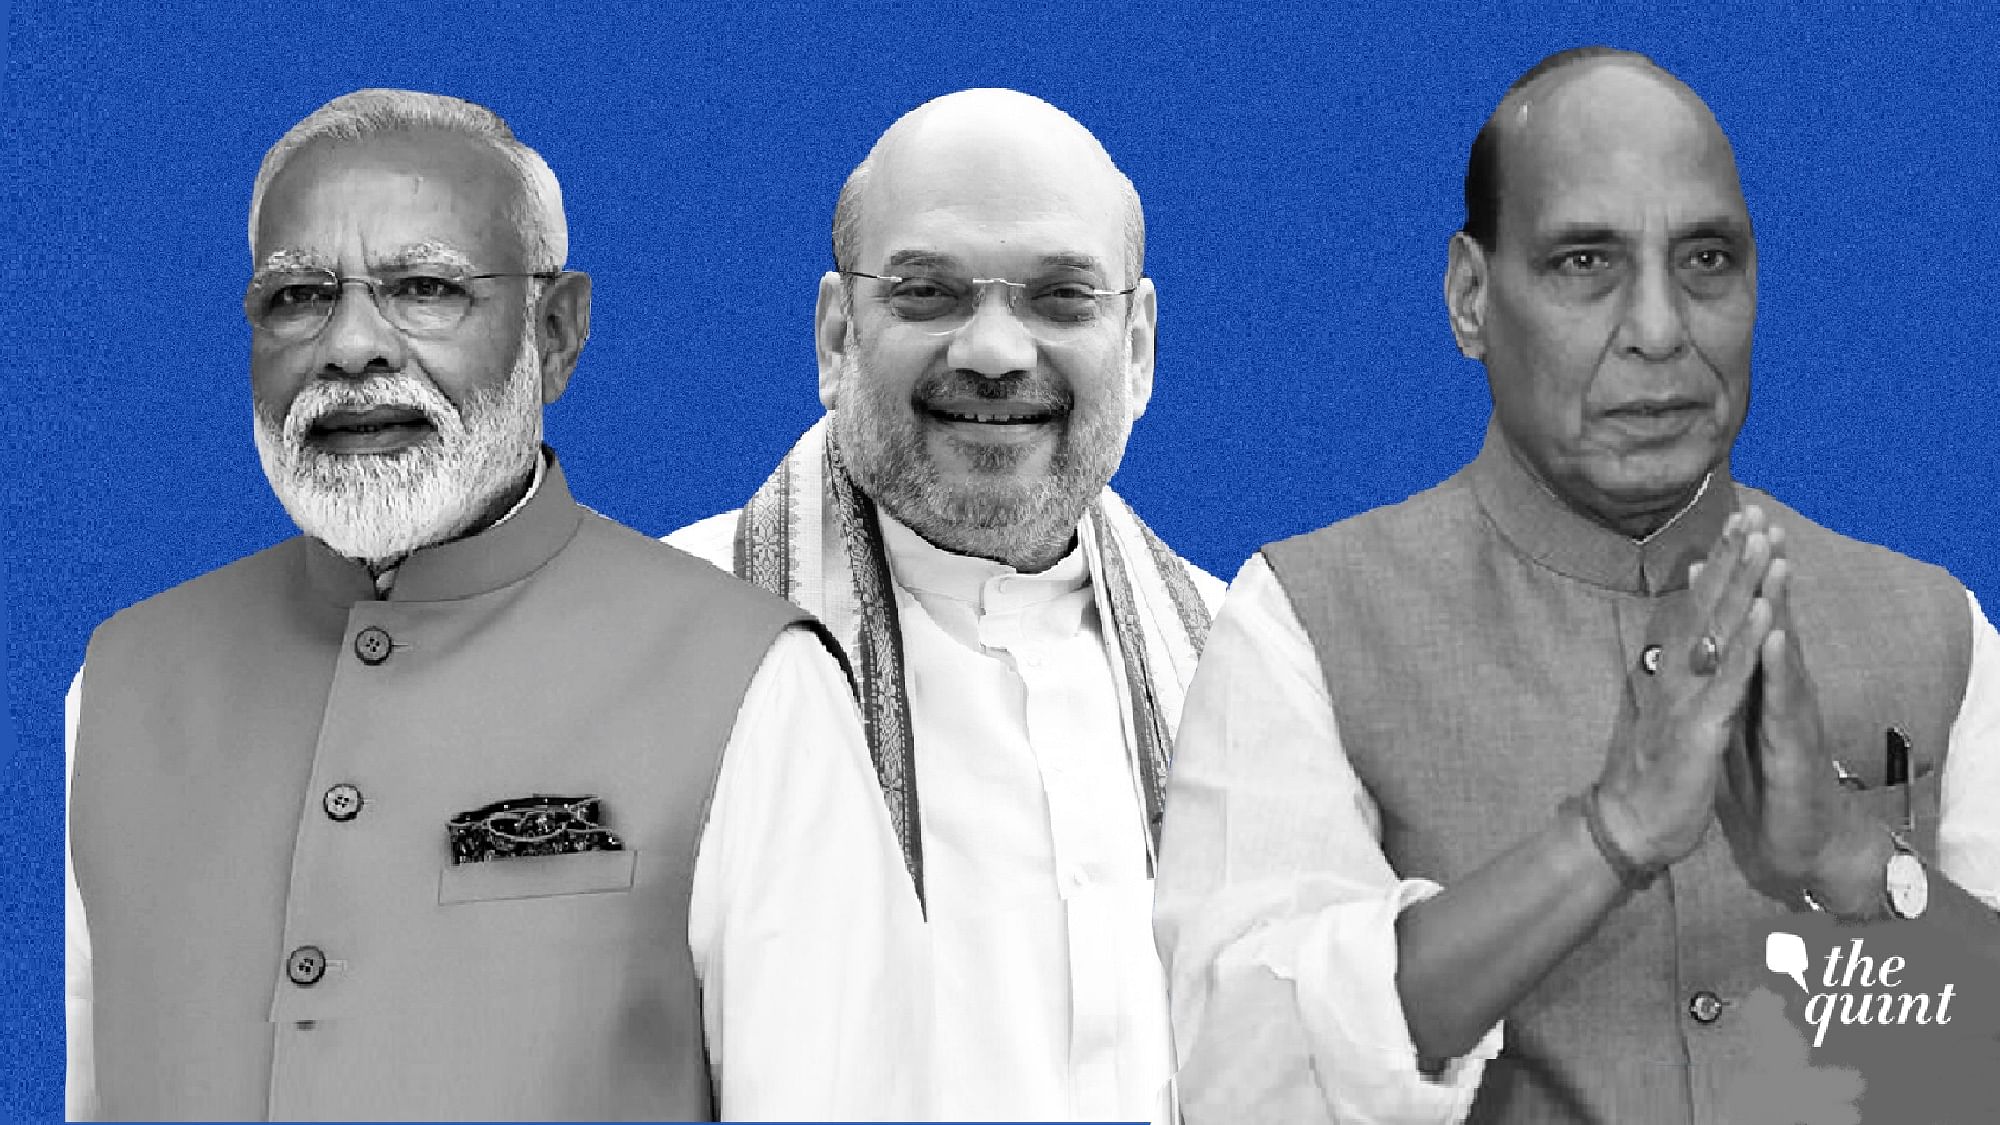 Rajnath Singh is now acutely aware that Amit Shah enjoys Narendra Modi’s confidence and that he is the de facto ‘number two’ in the BJP government.